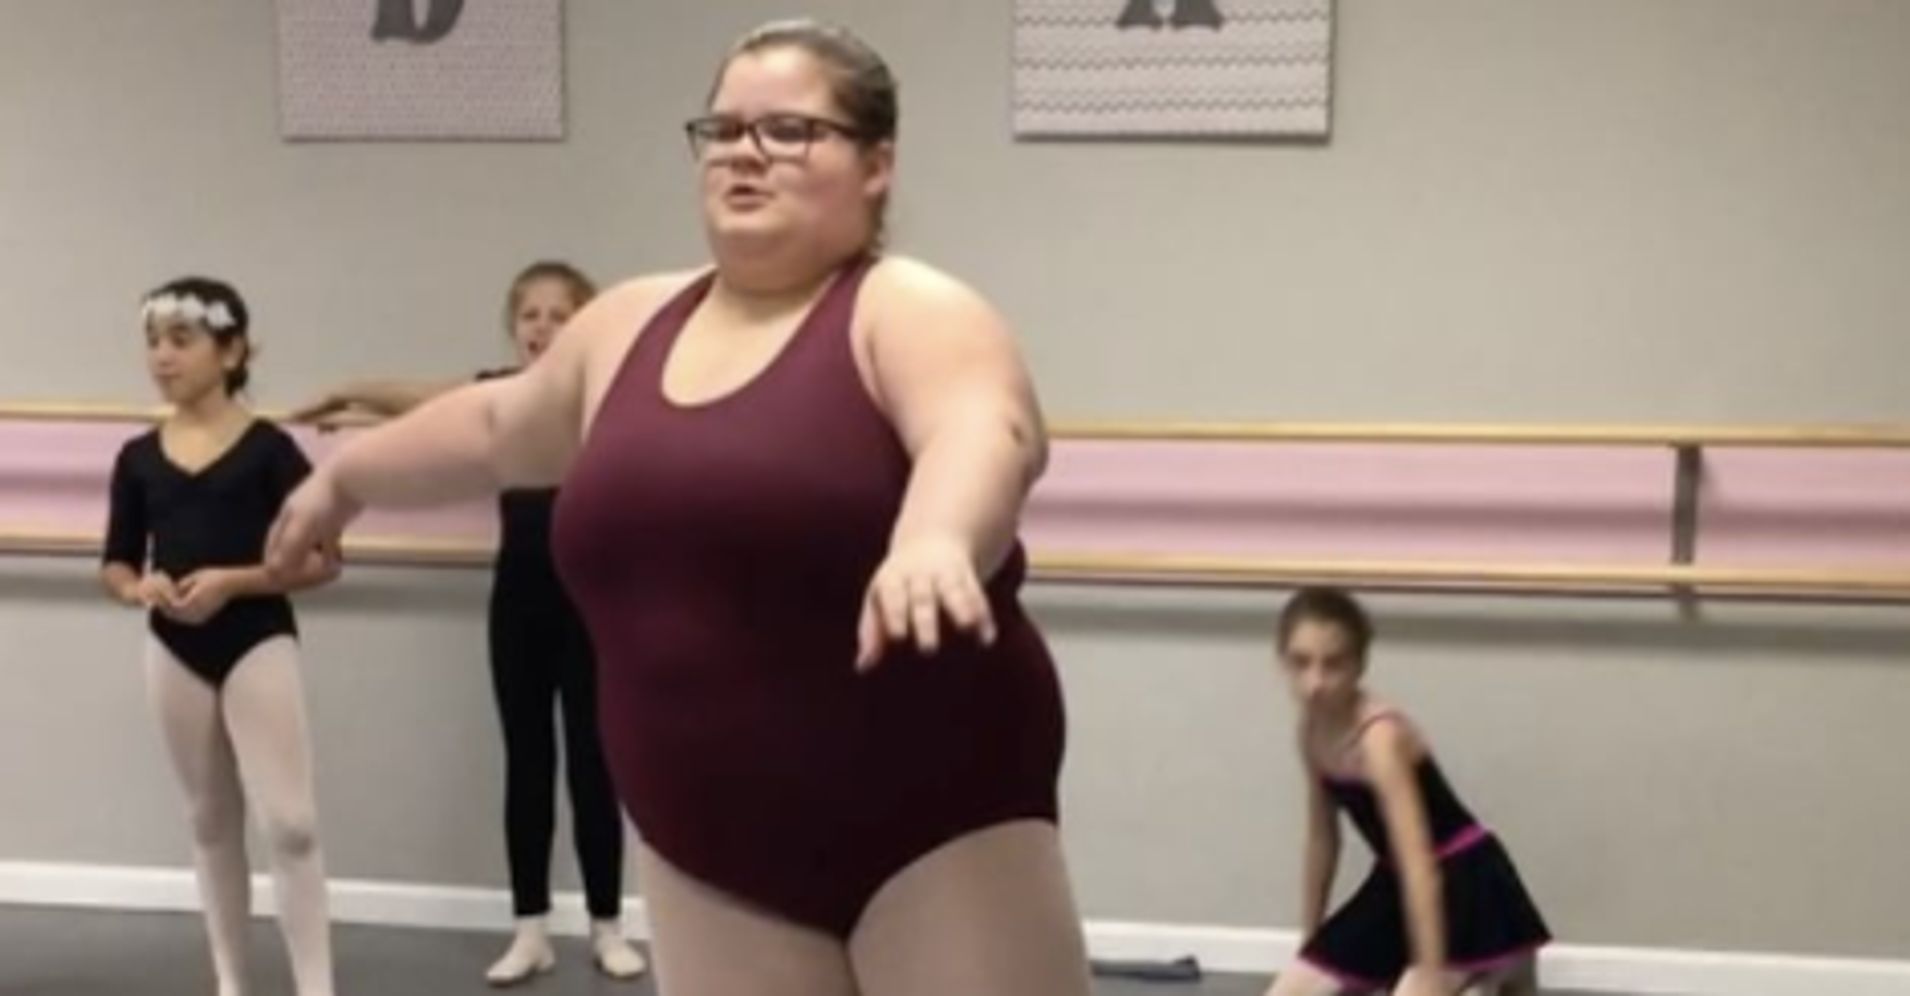 This Teen Dancer Went Viral For Her Body Image Now Comes The Aftermath